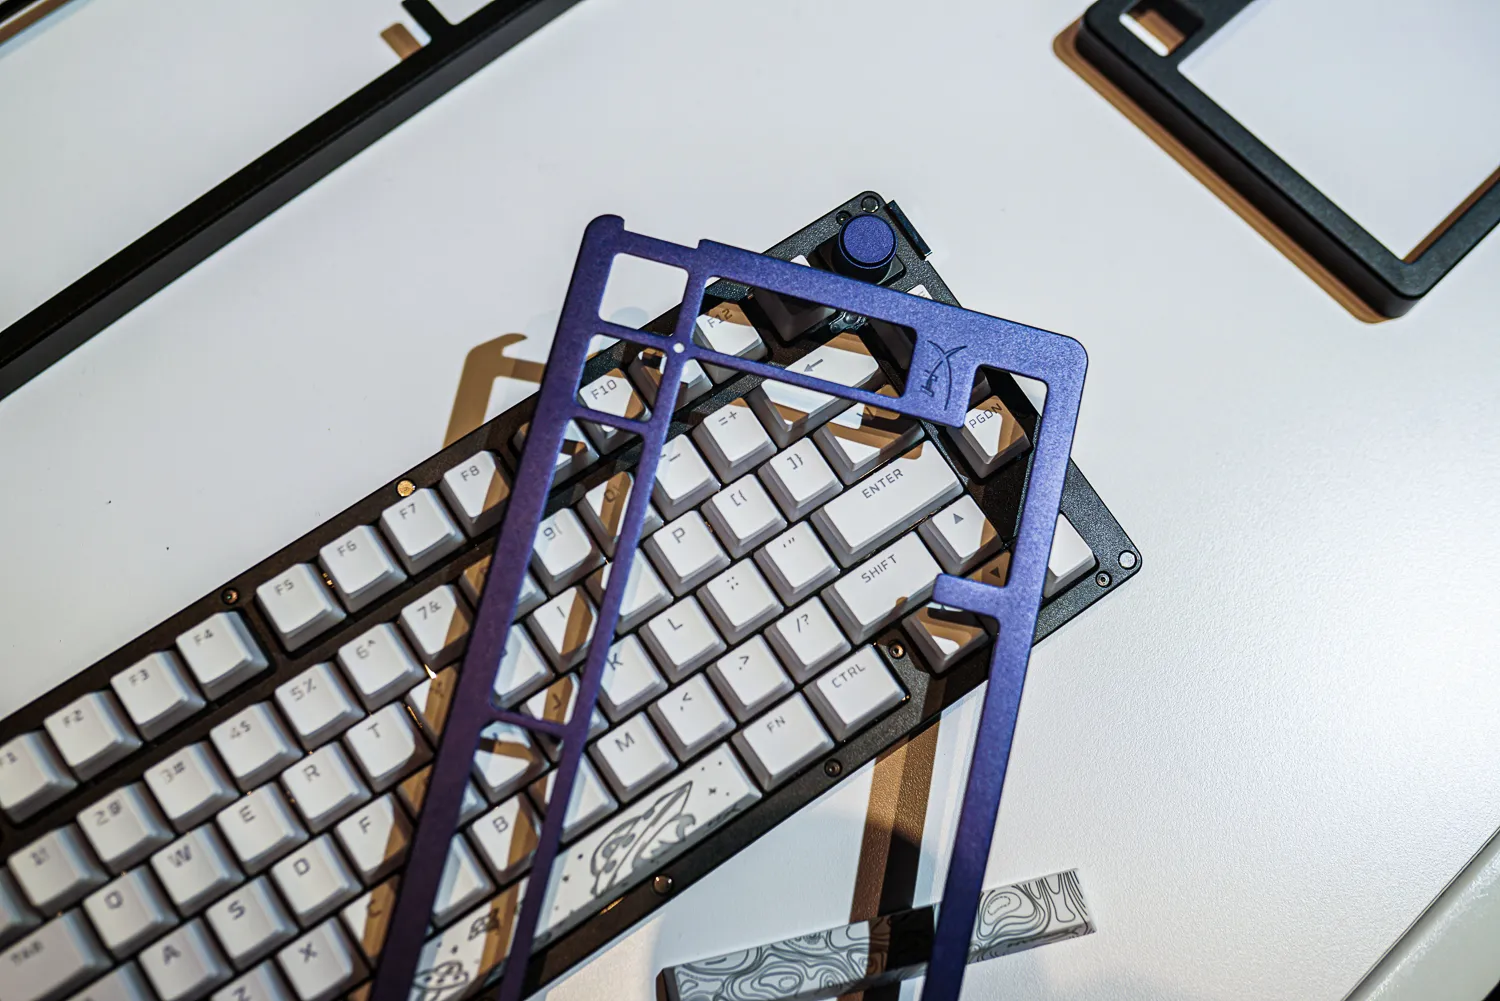 Shell of the HyperX Alloy Rise keyboard